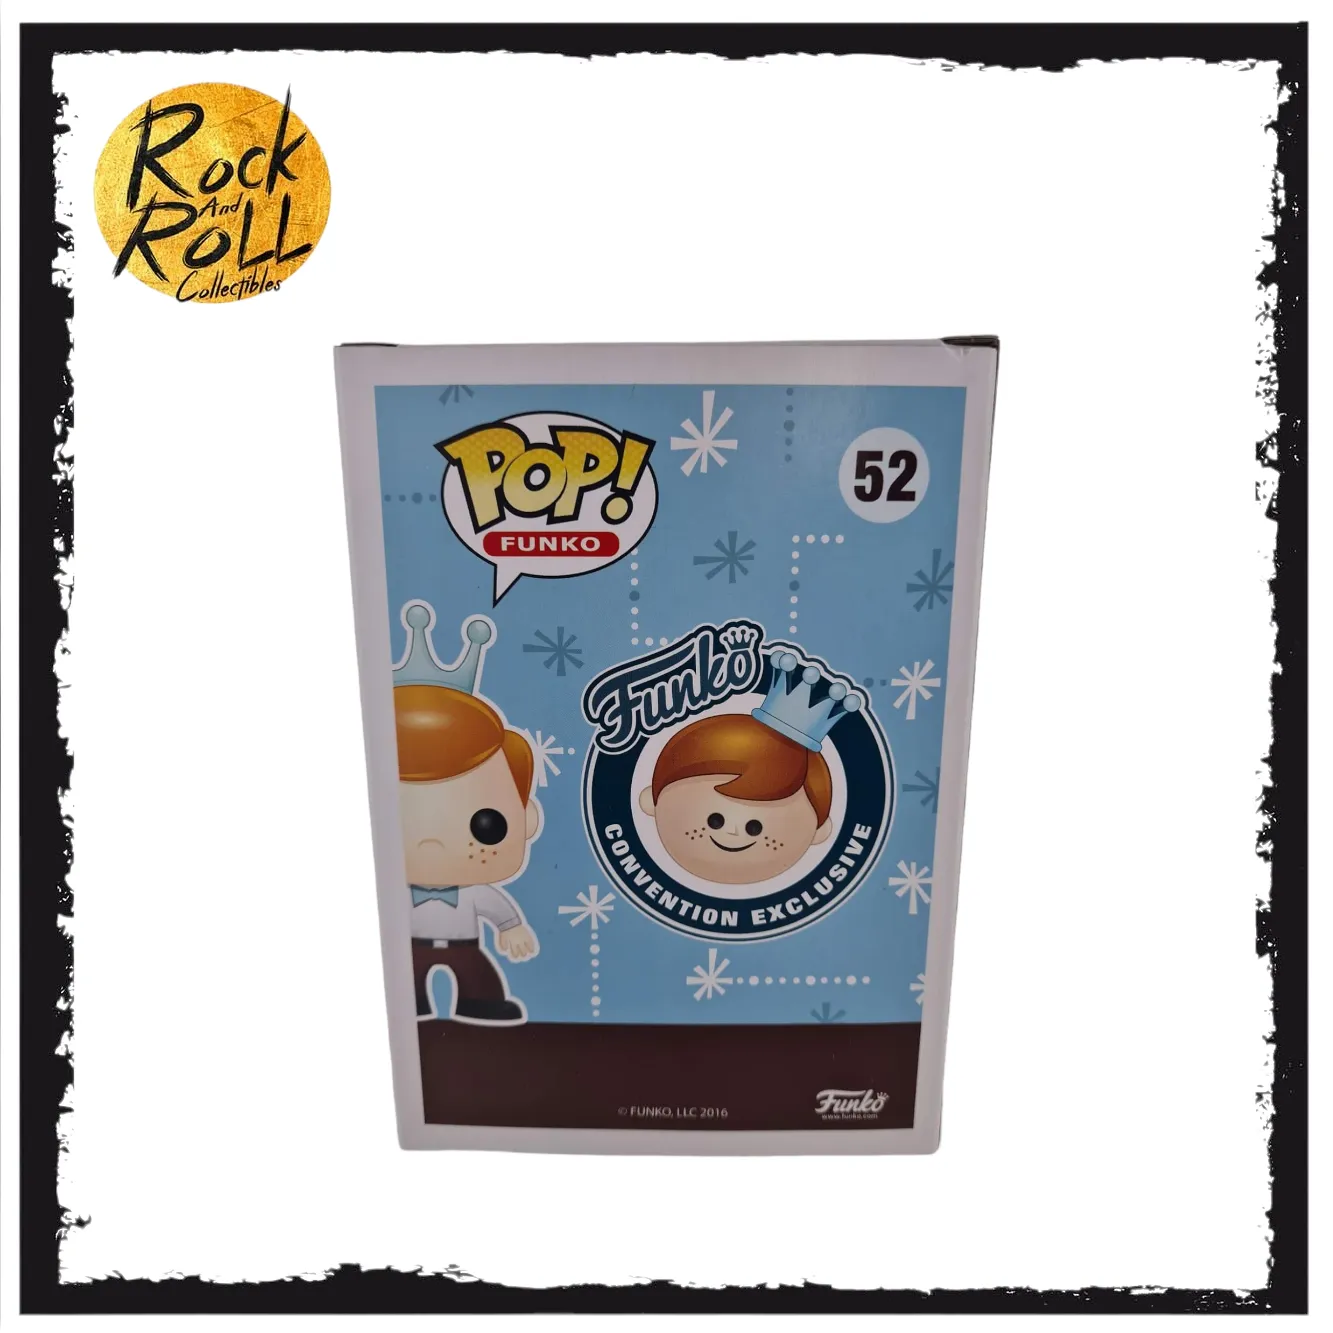 Freddy Funko as WWE Sting #52 2016 SDCC 500pcs. Condition 8/10